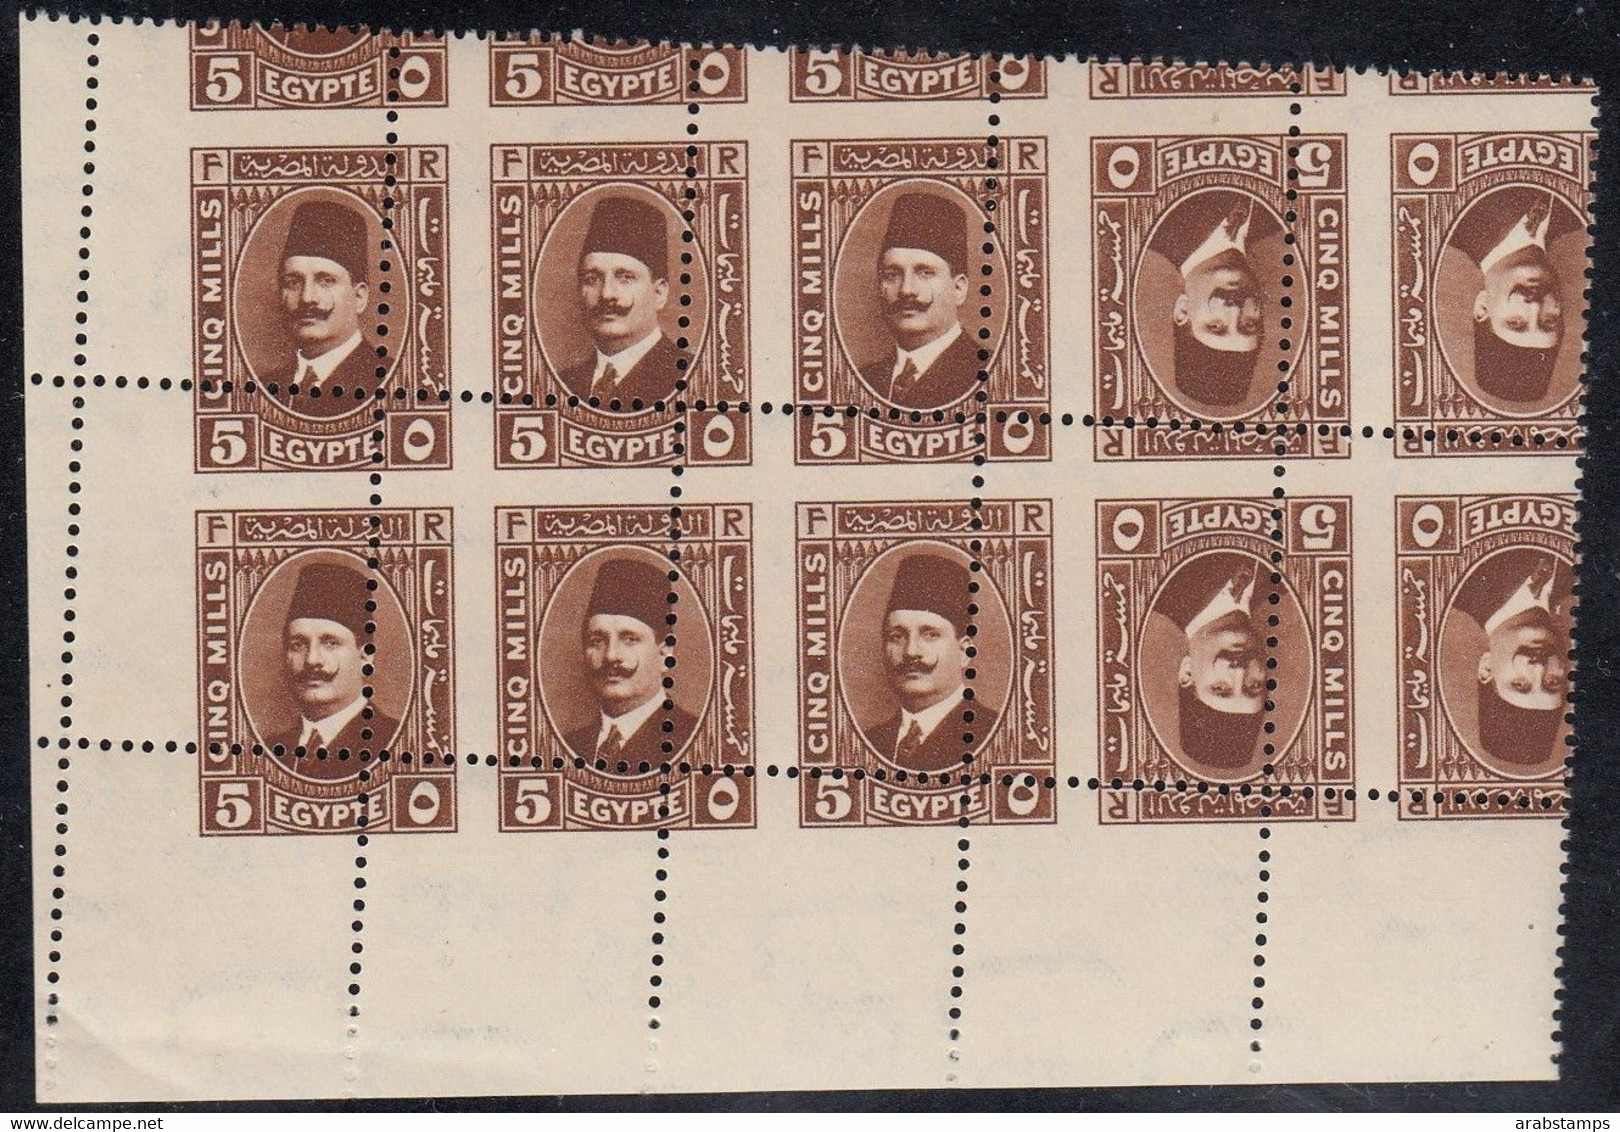 1936 Egypt King Faud  Corner Misperf  ٍRoyal Collection 5 Mills With A Watermark S.G236 Very Rare MNH - Unused Stamps